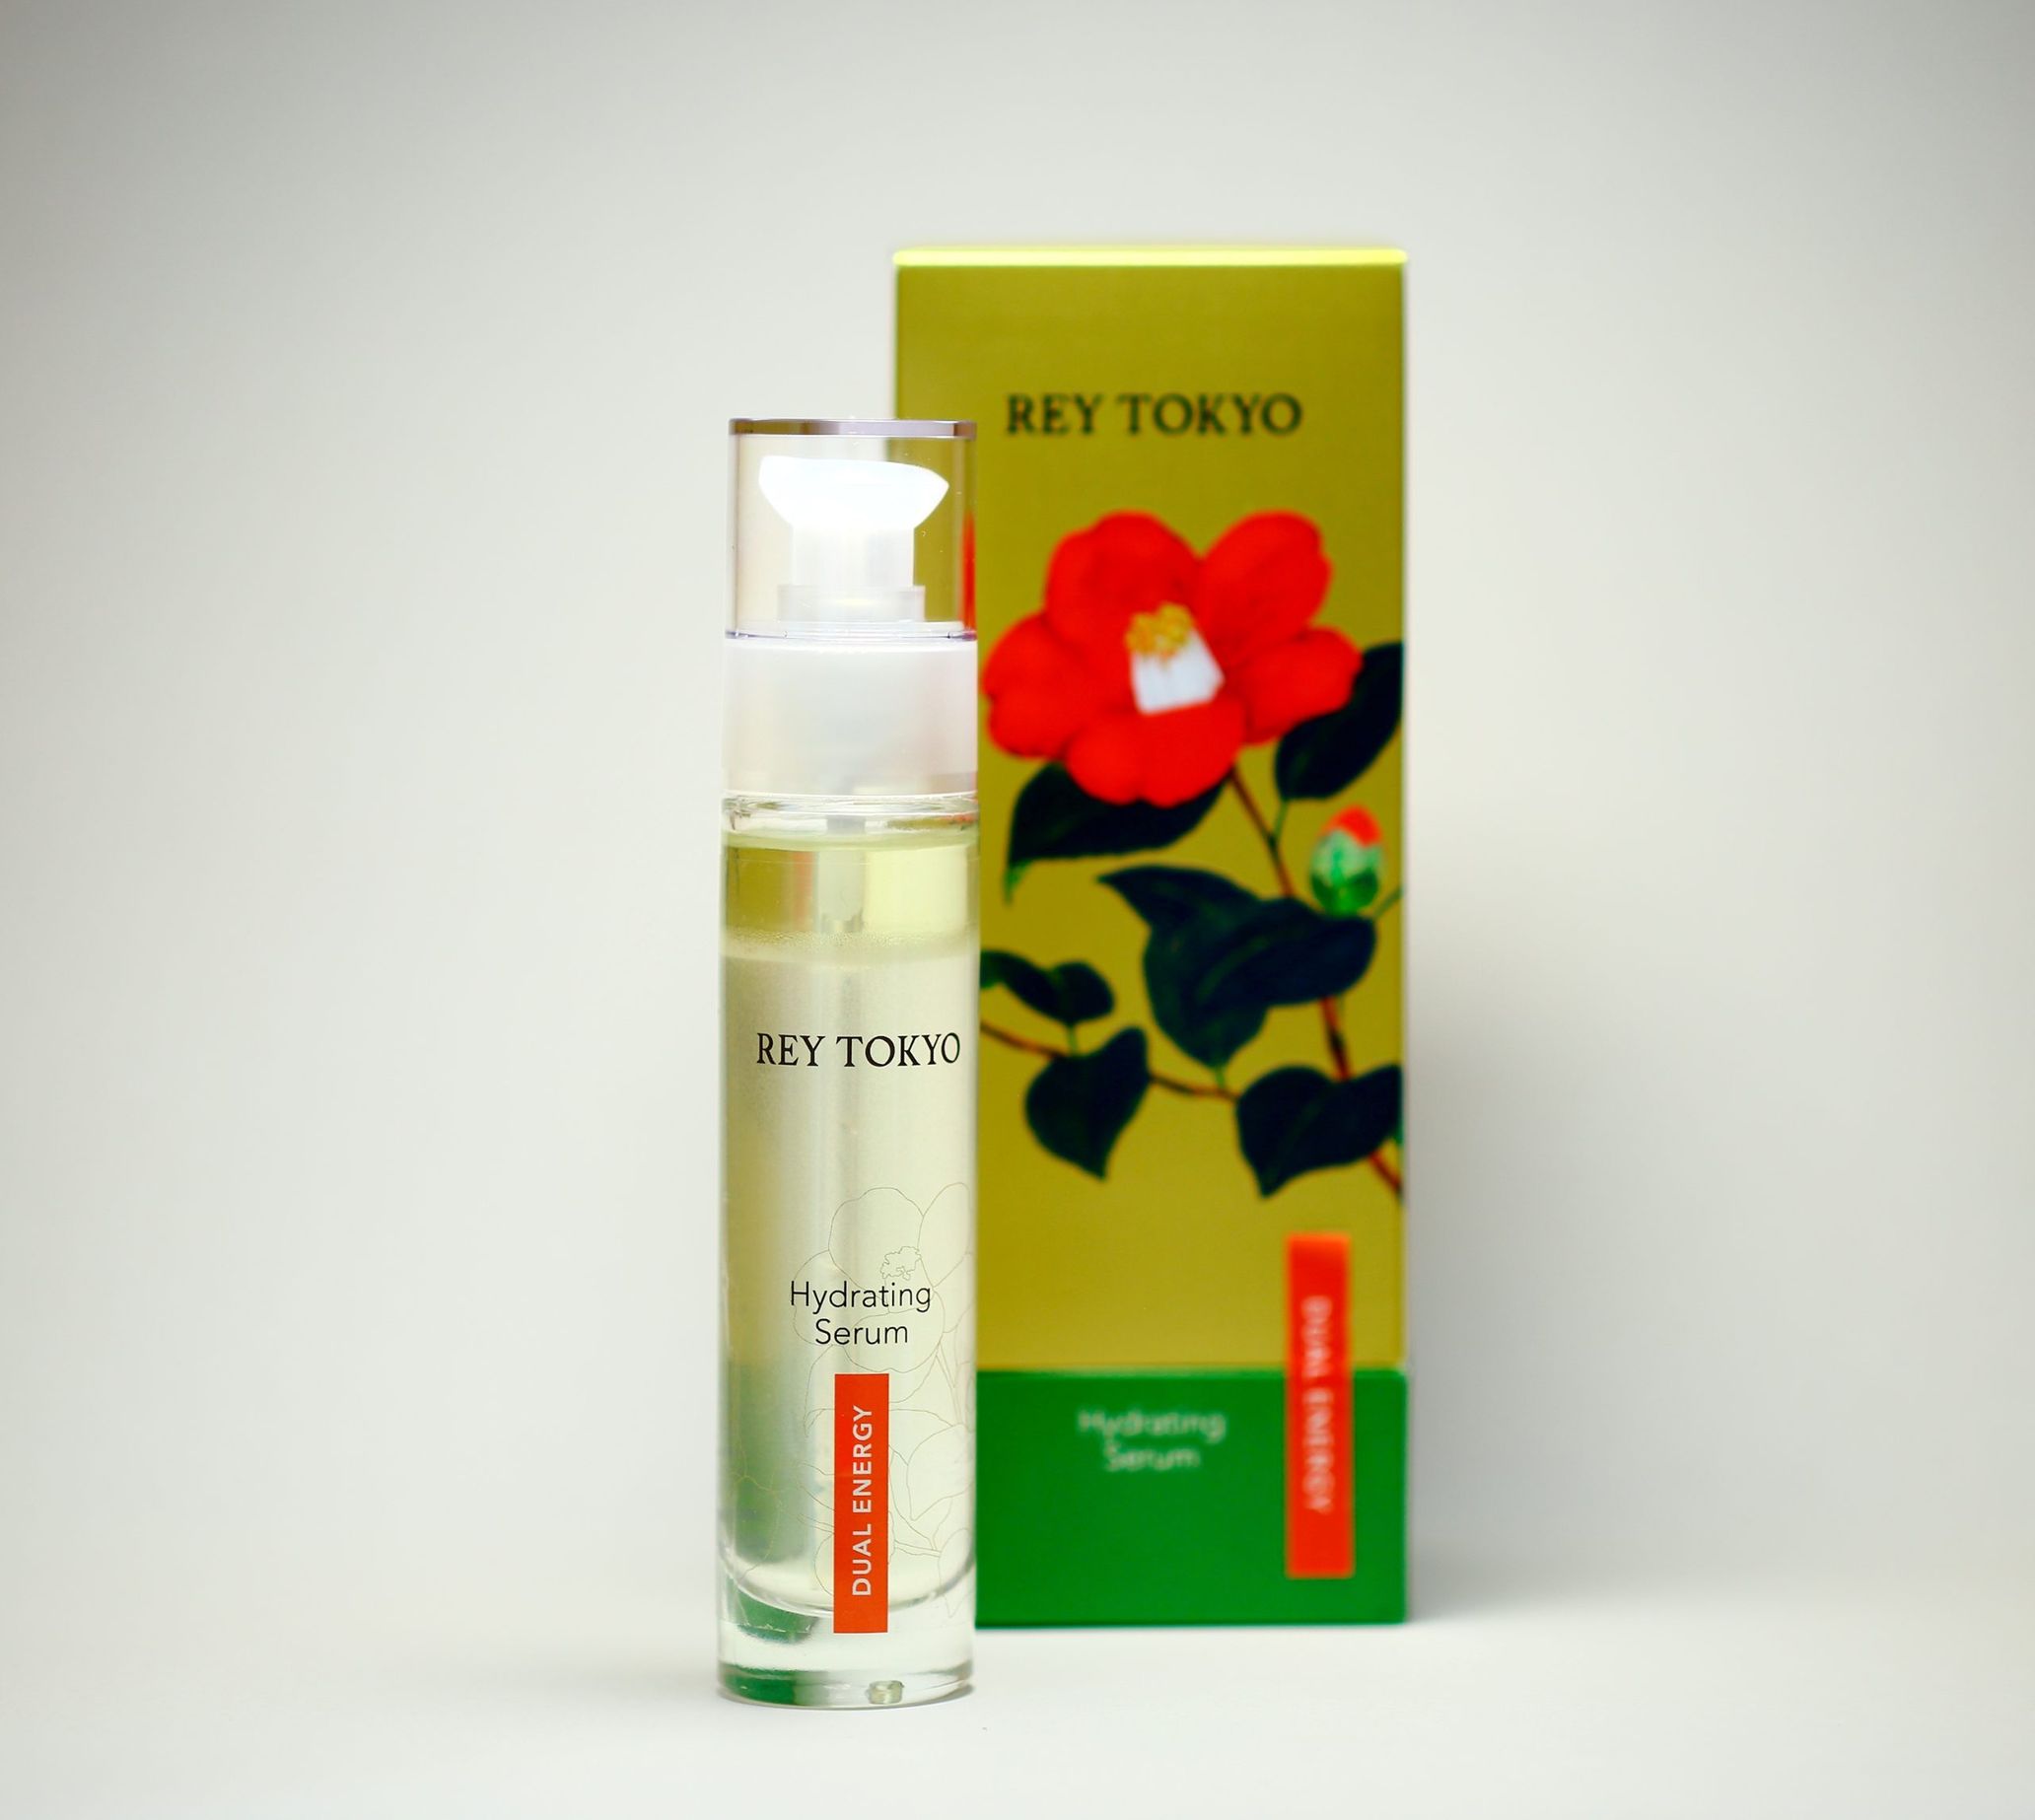 J-Beauty Report from Europe Vol.6: REY TOKYO Harmonizes Ancient Japanese Wisdom with the Latest German Technology